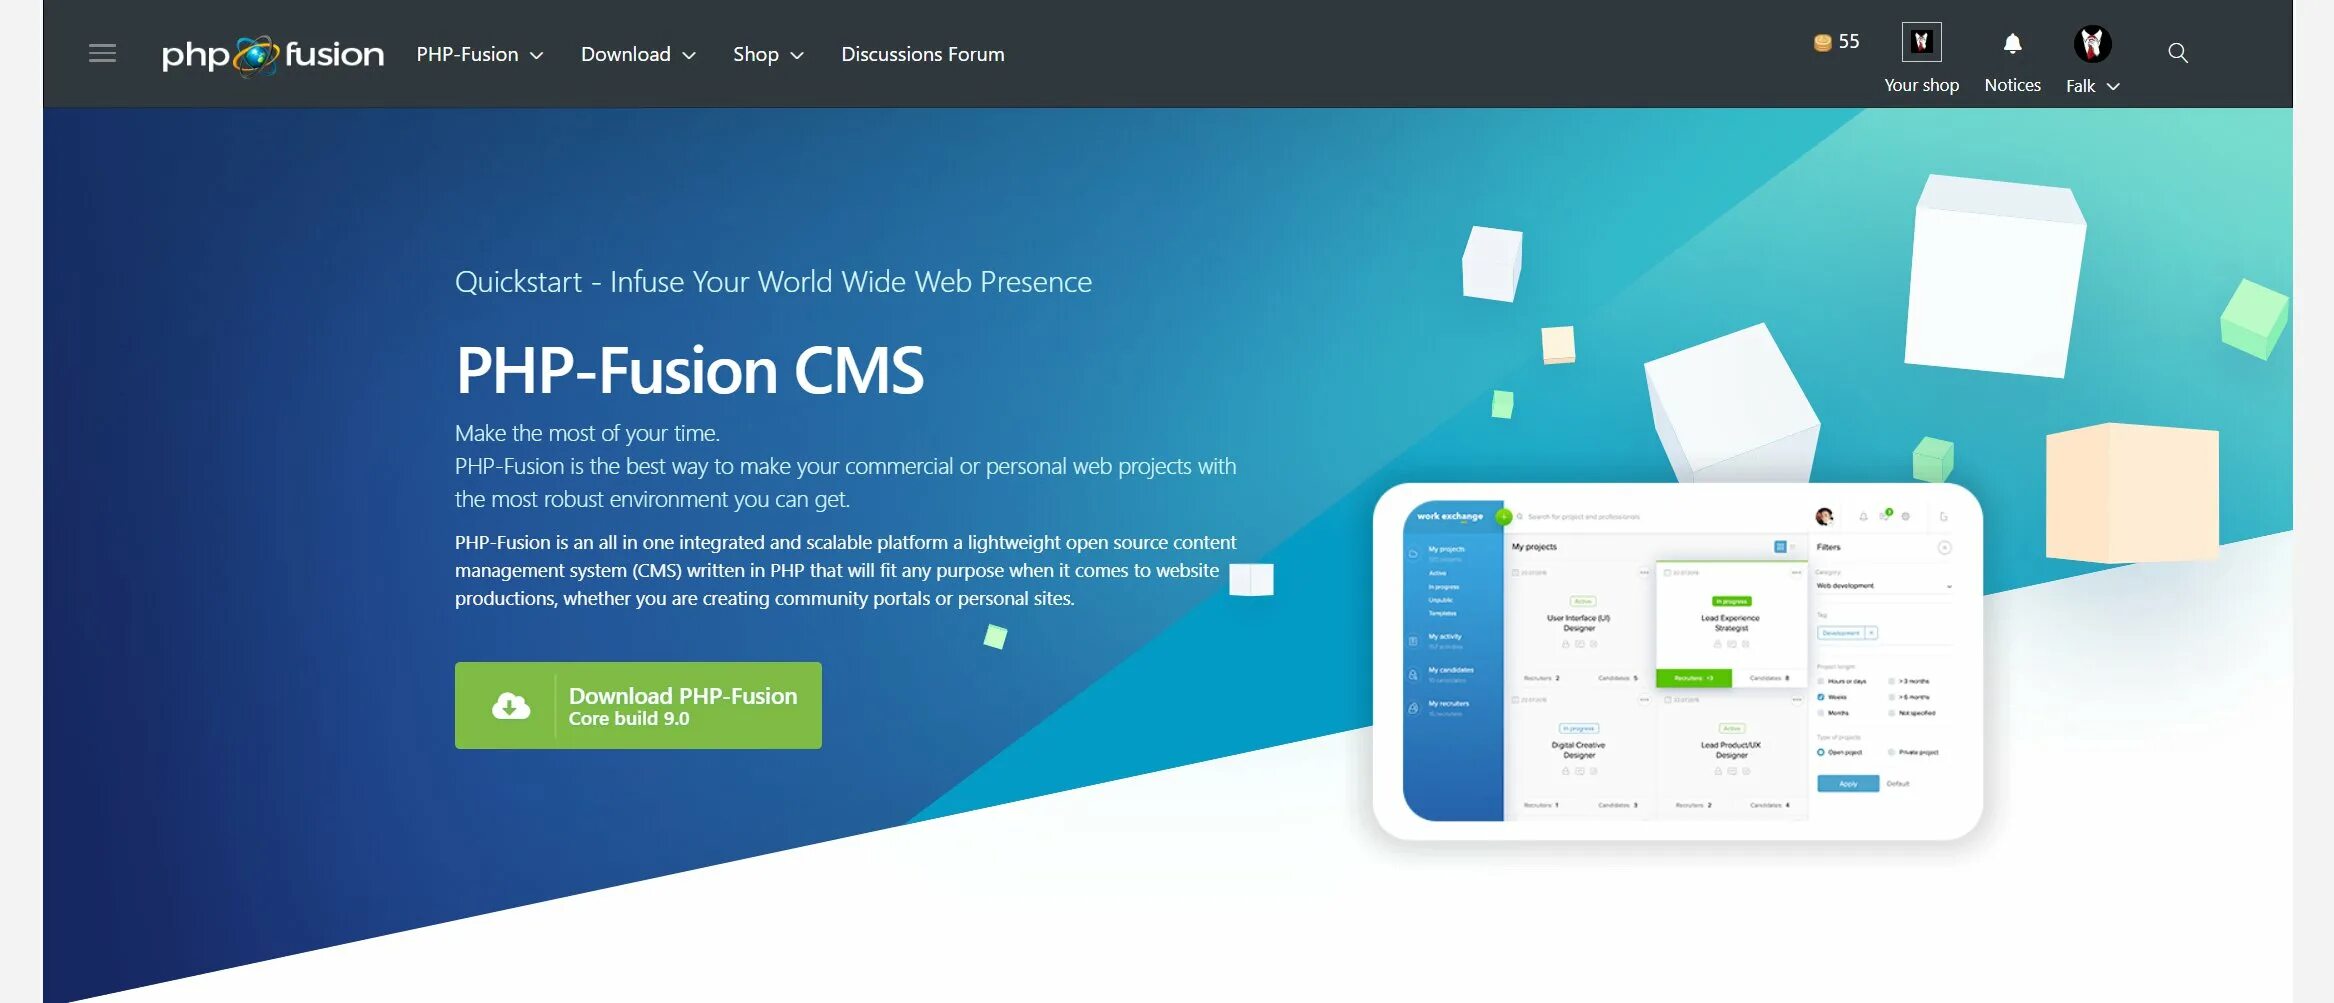 Forum php dl. Php-Fusion. Php download. Cms php. Open source cms.